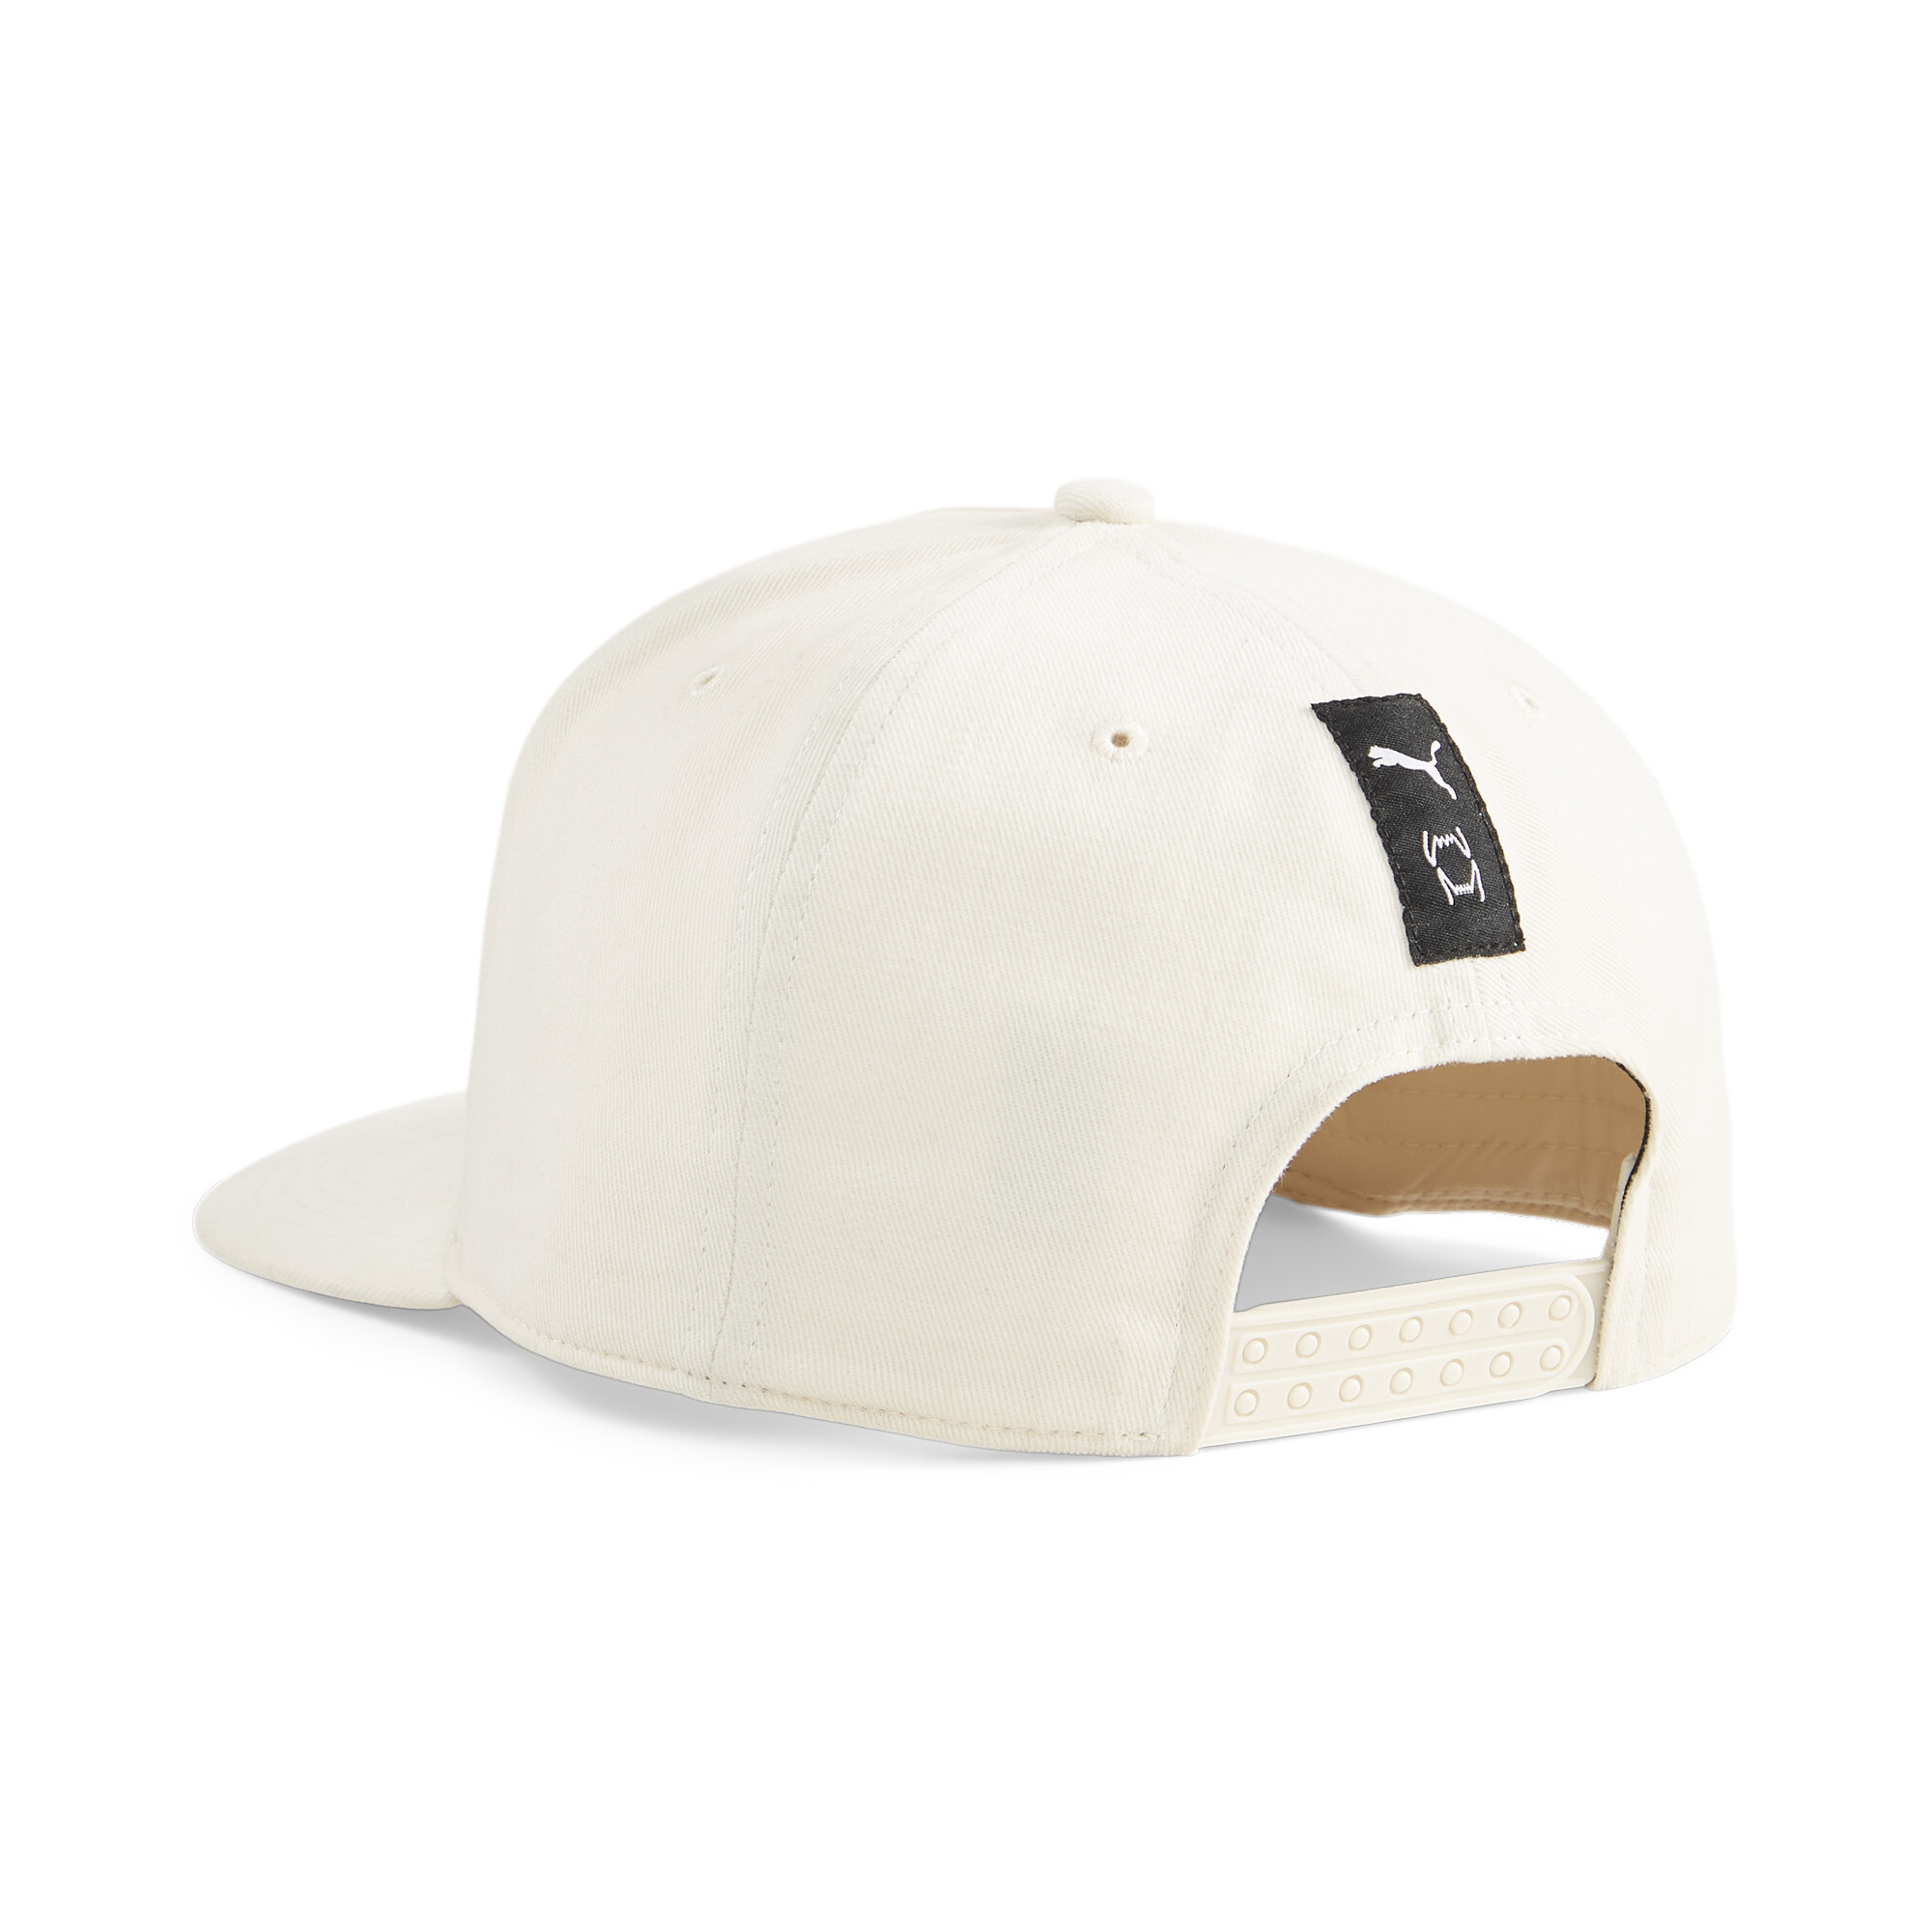 Puma Players Edition Low Curve Cap, White, Size Adult, Accessories